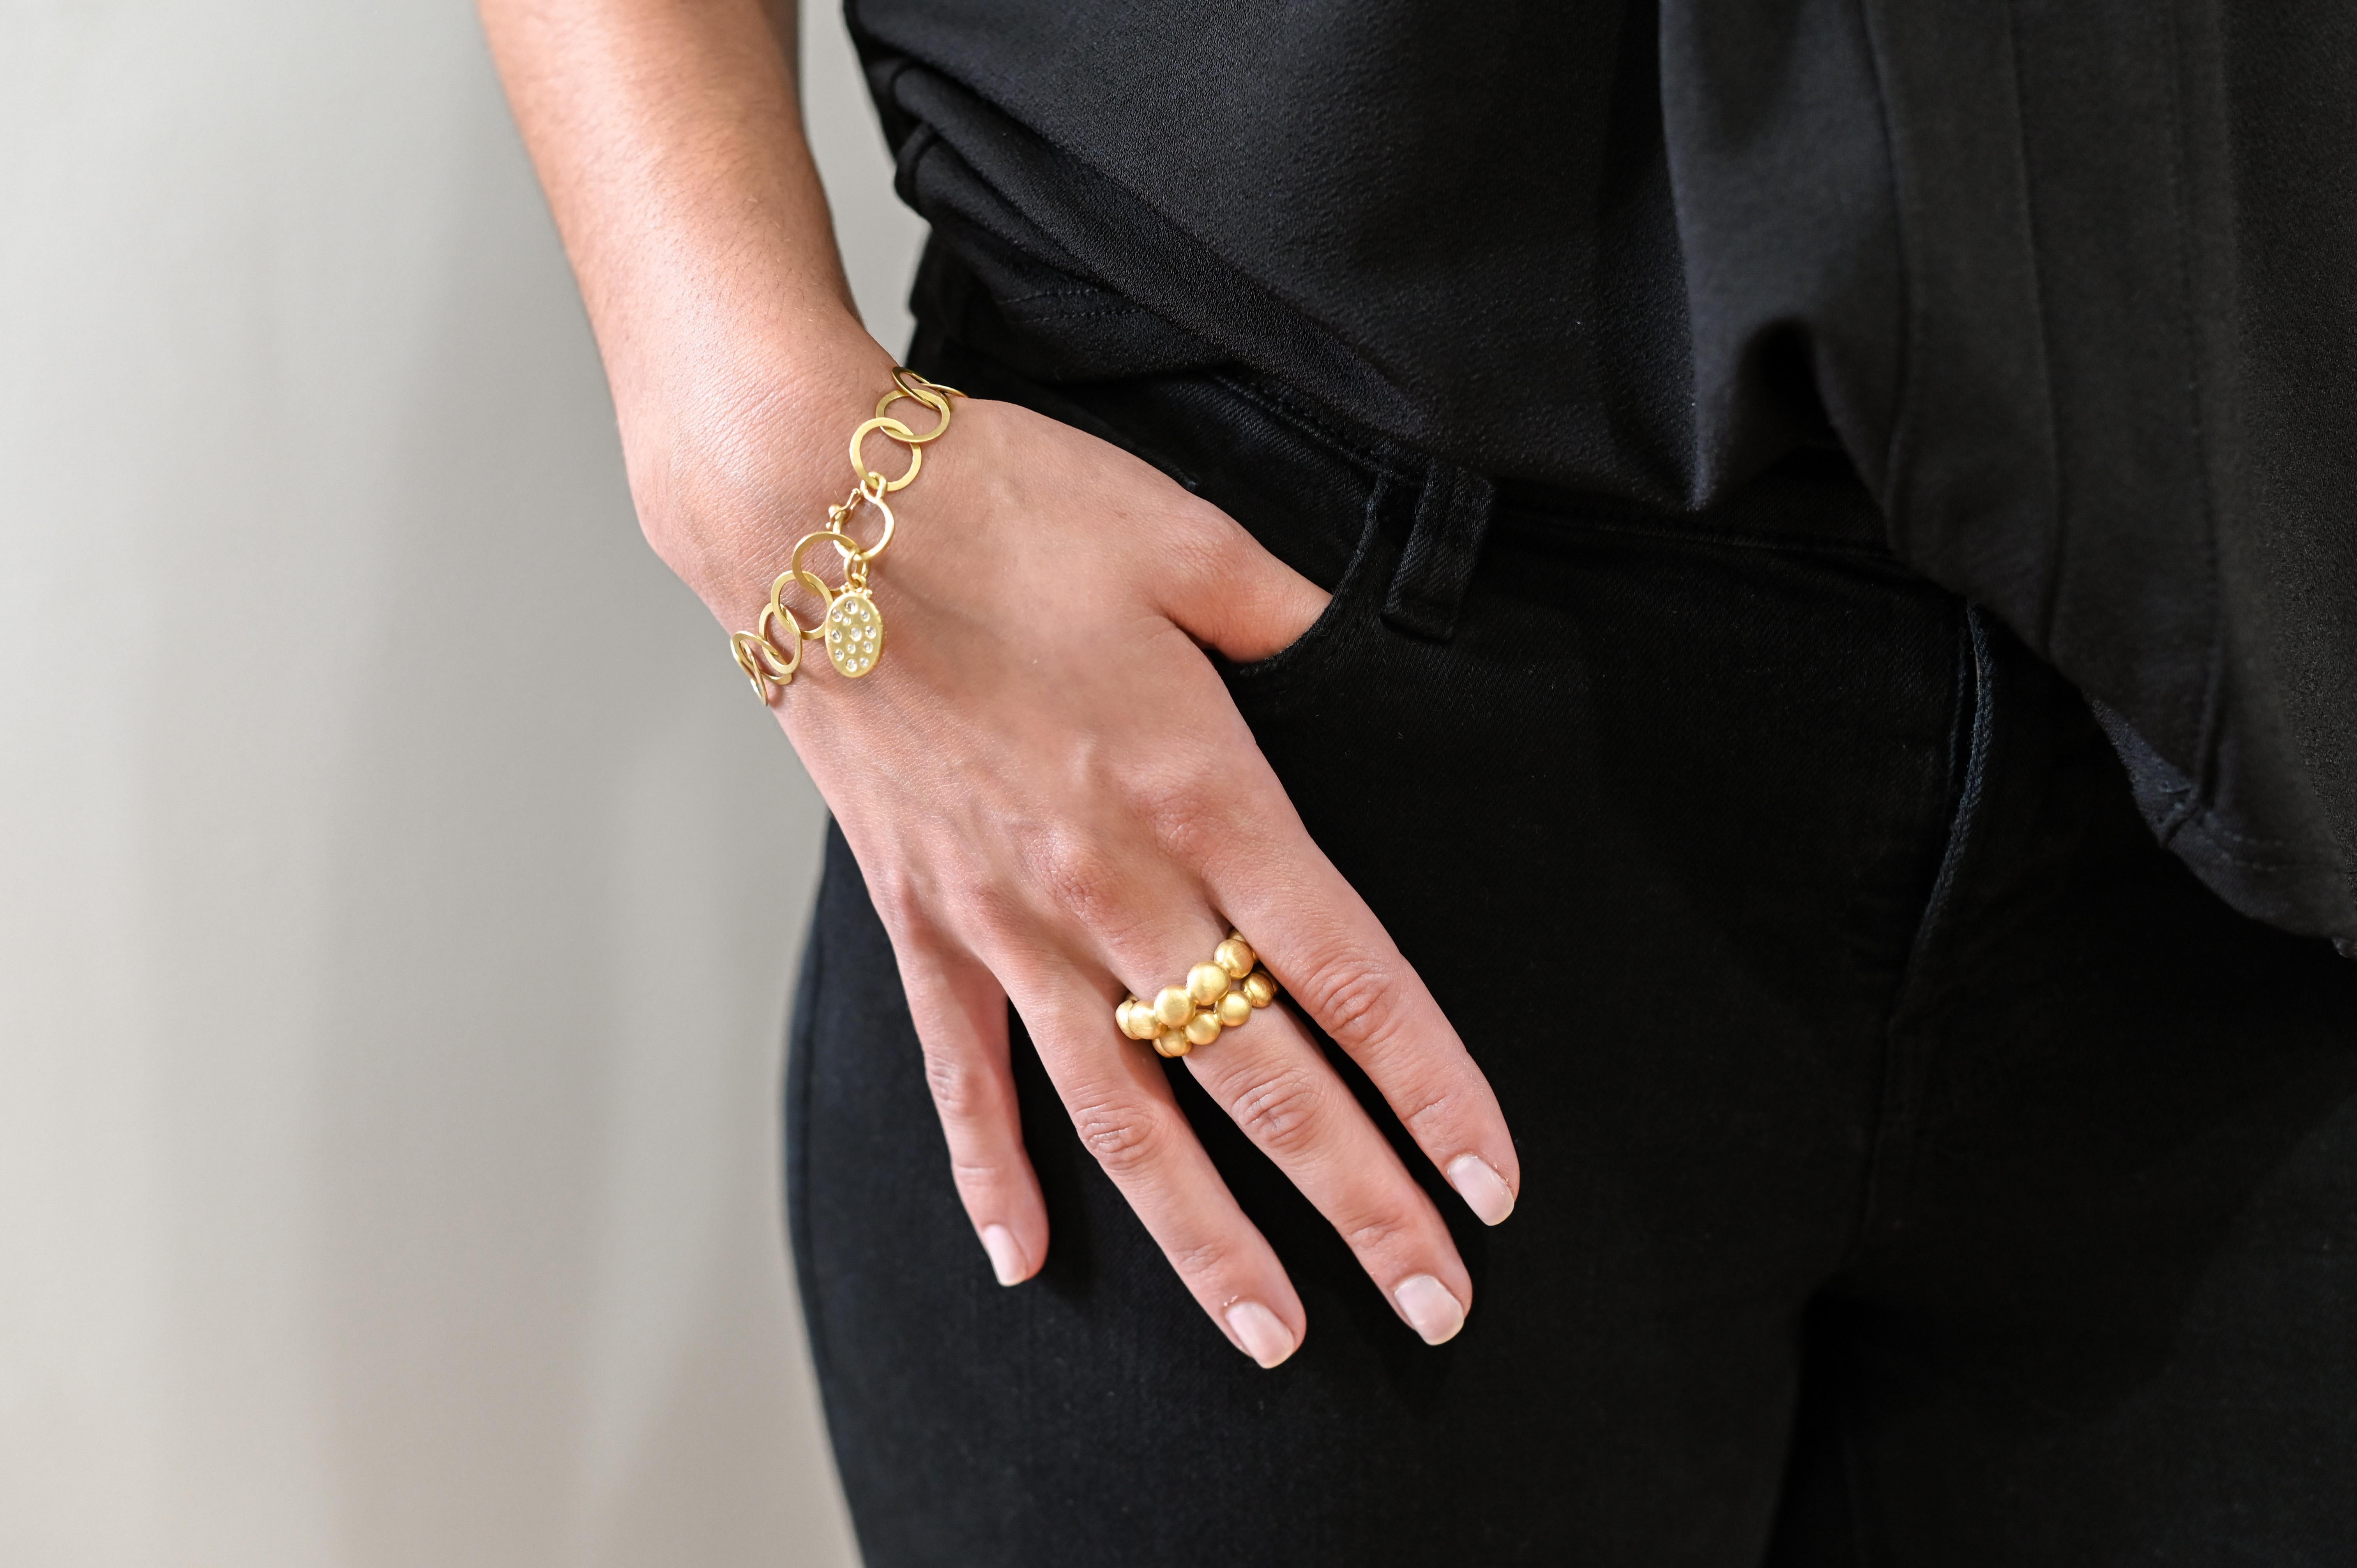 From Faye Kim's signature stack ring collection, a set of 2 large bubble stack rings offer unique style and comfort in 18k green* gold. Make a statement and create your own style by mixing and matching with other rings.  Matte-finished.

Width: 6MM,